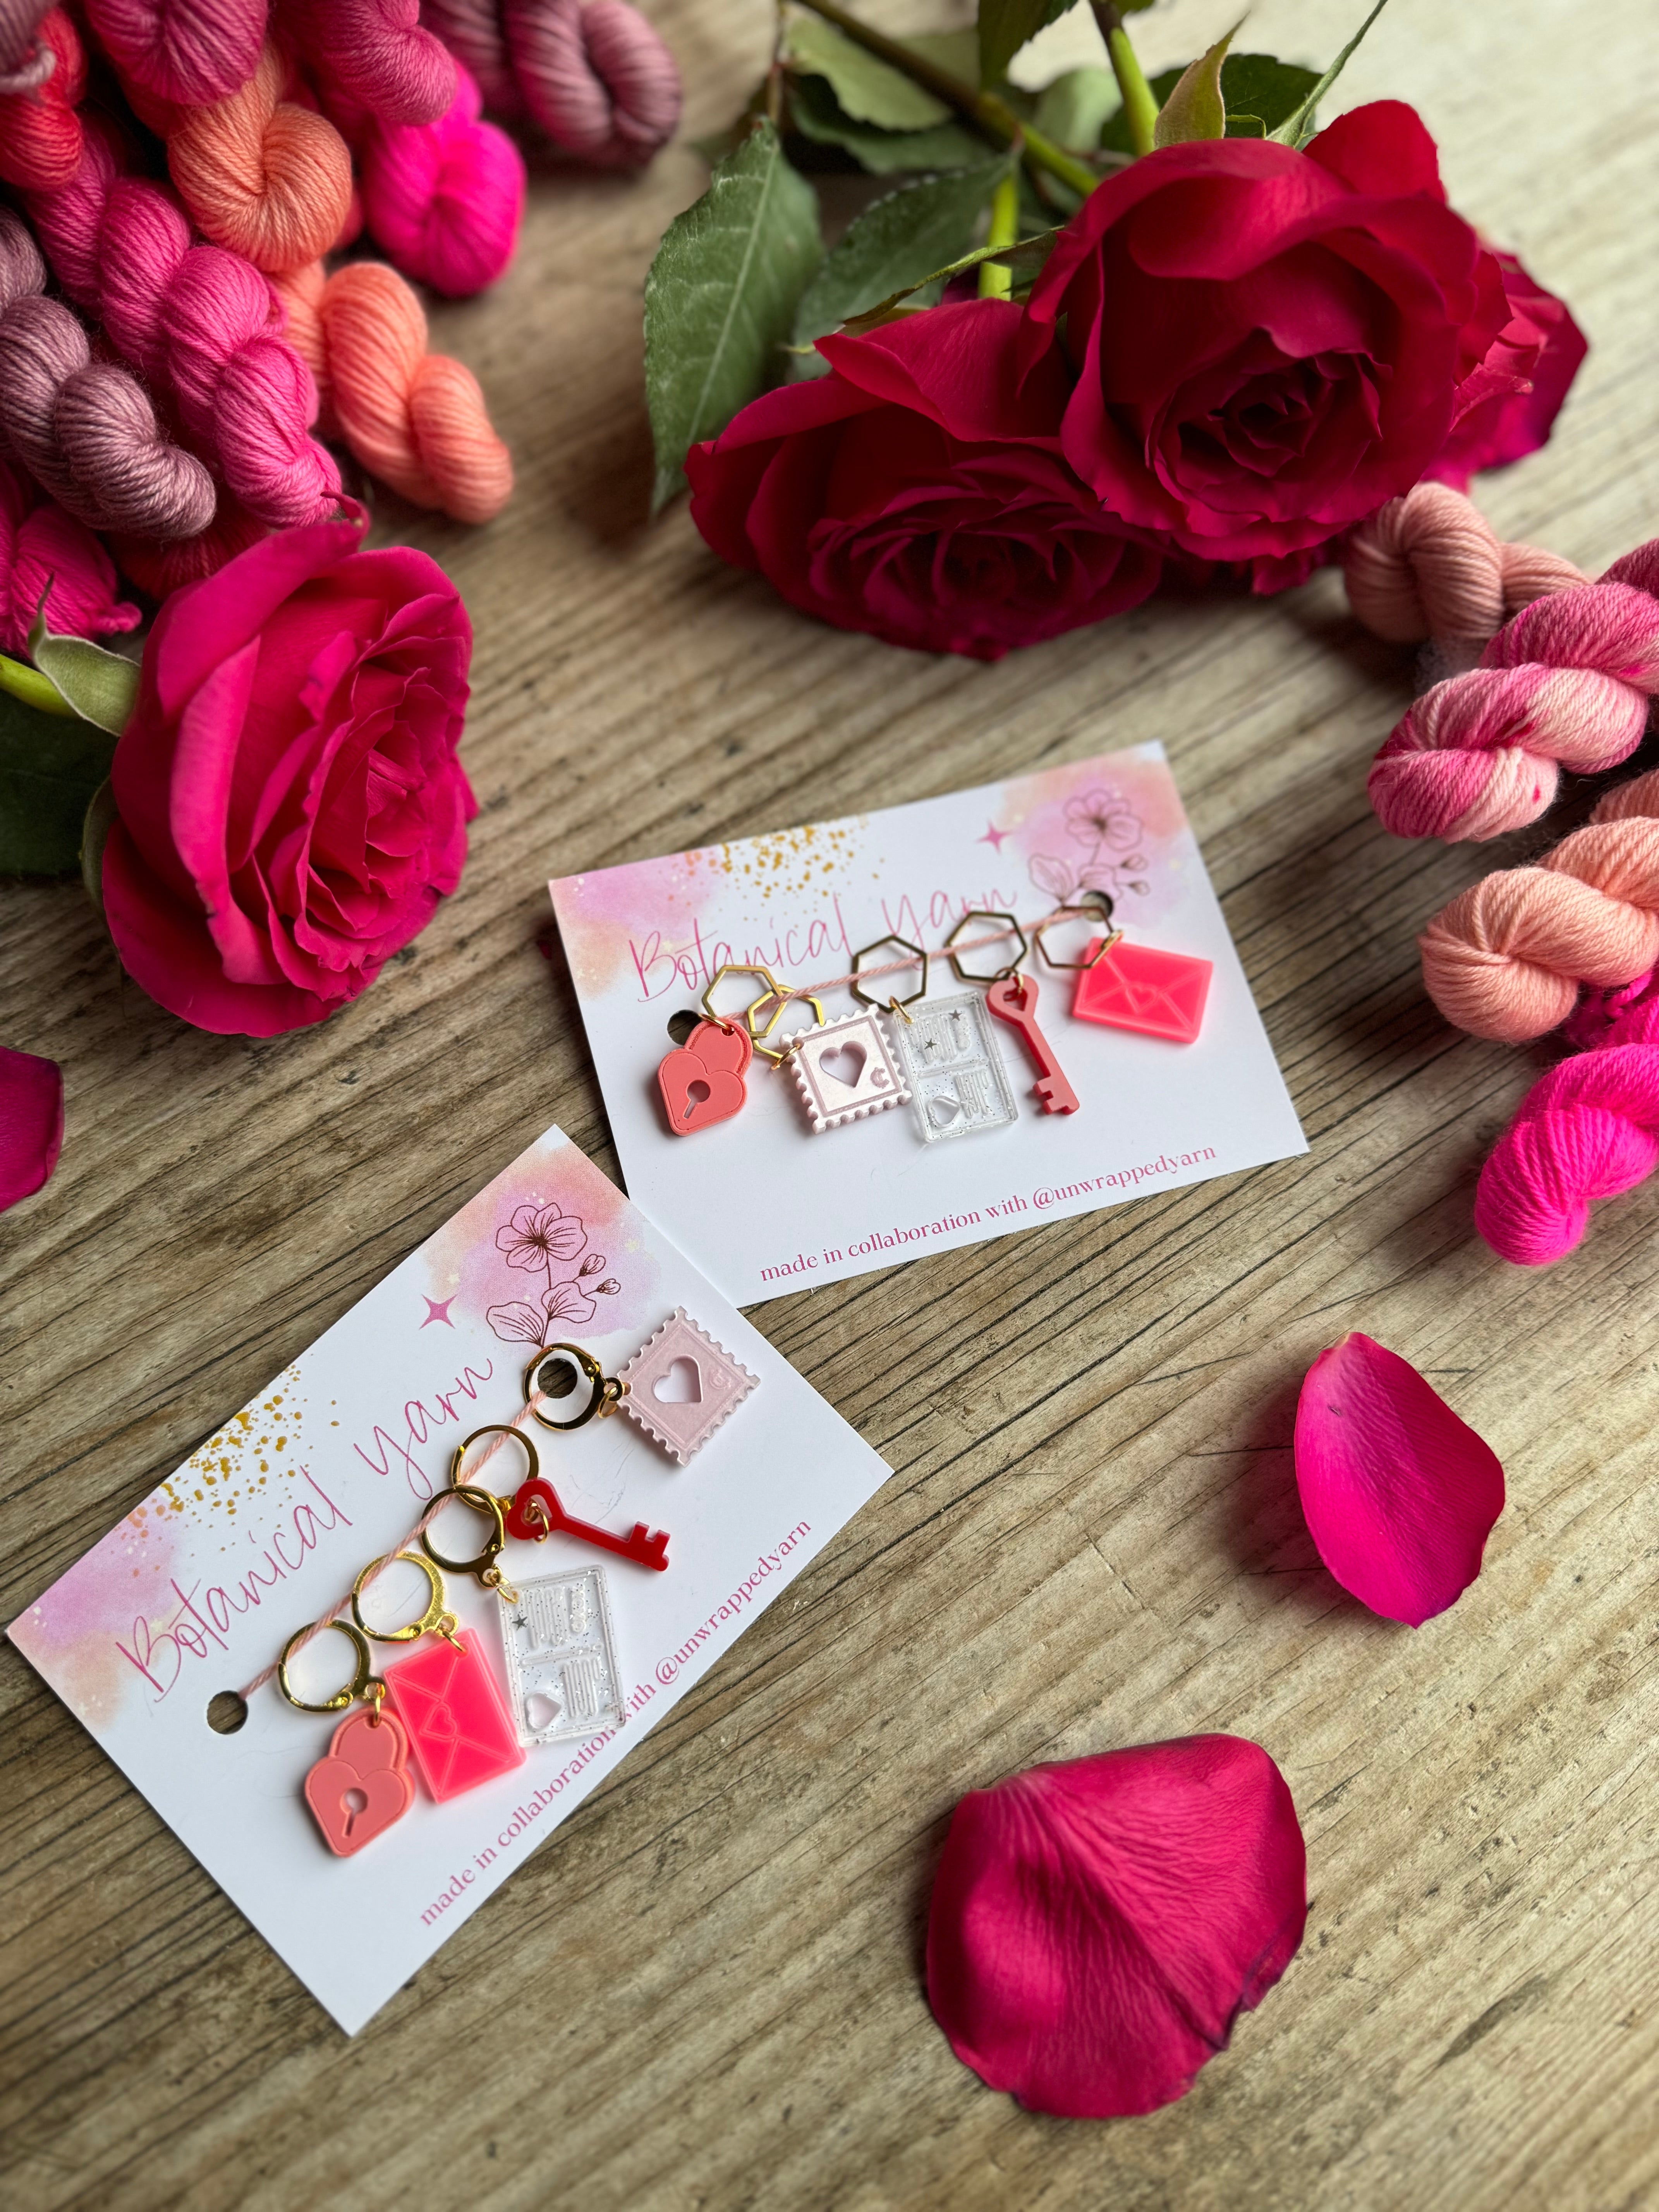 Valentine Stitch markers / progress keepers made in collaboration with Unwrapped Yarn